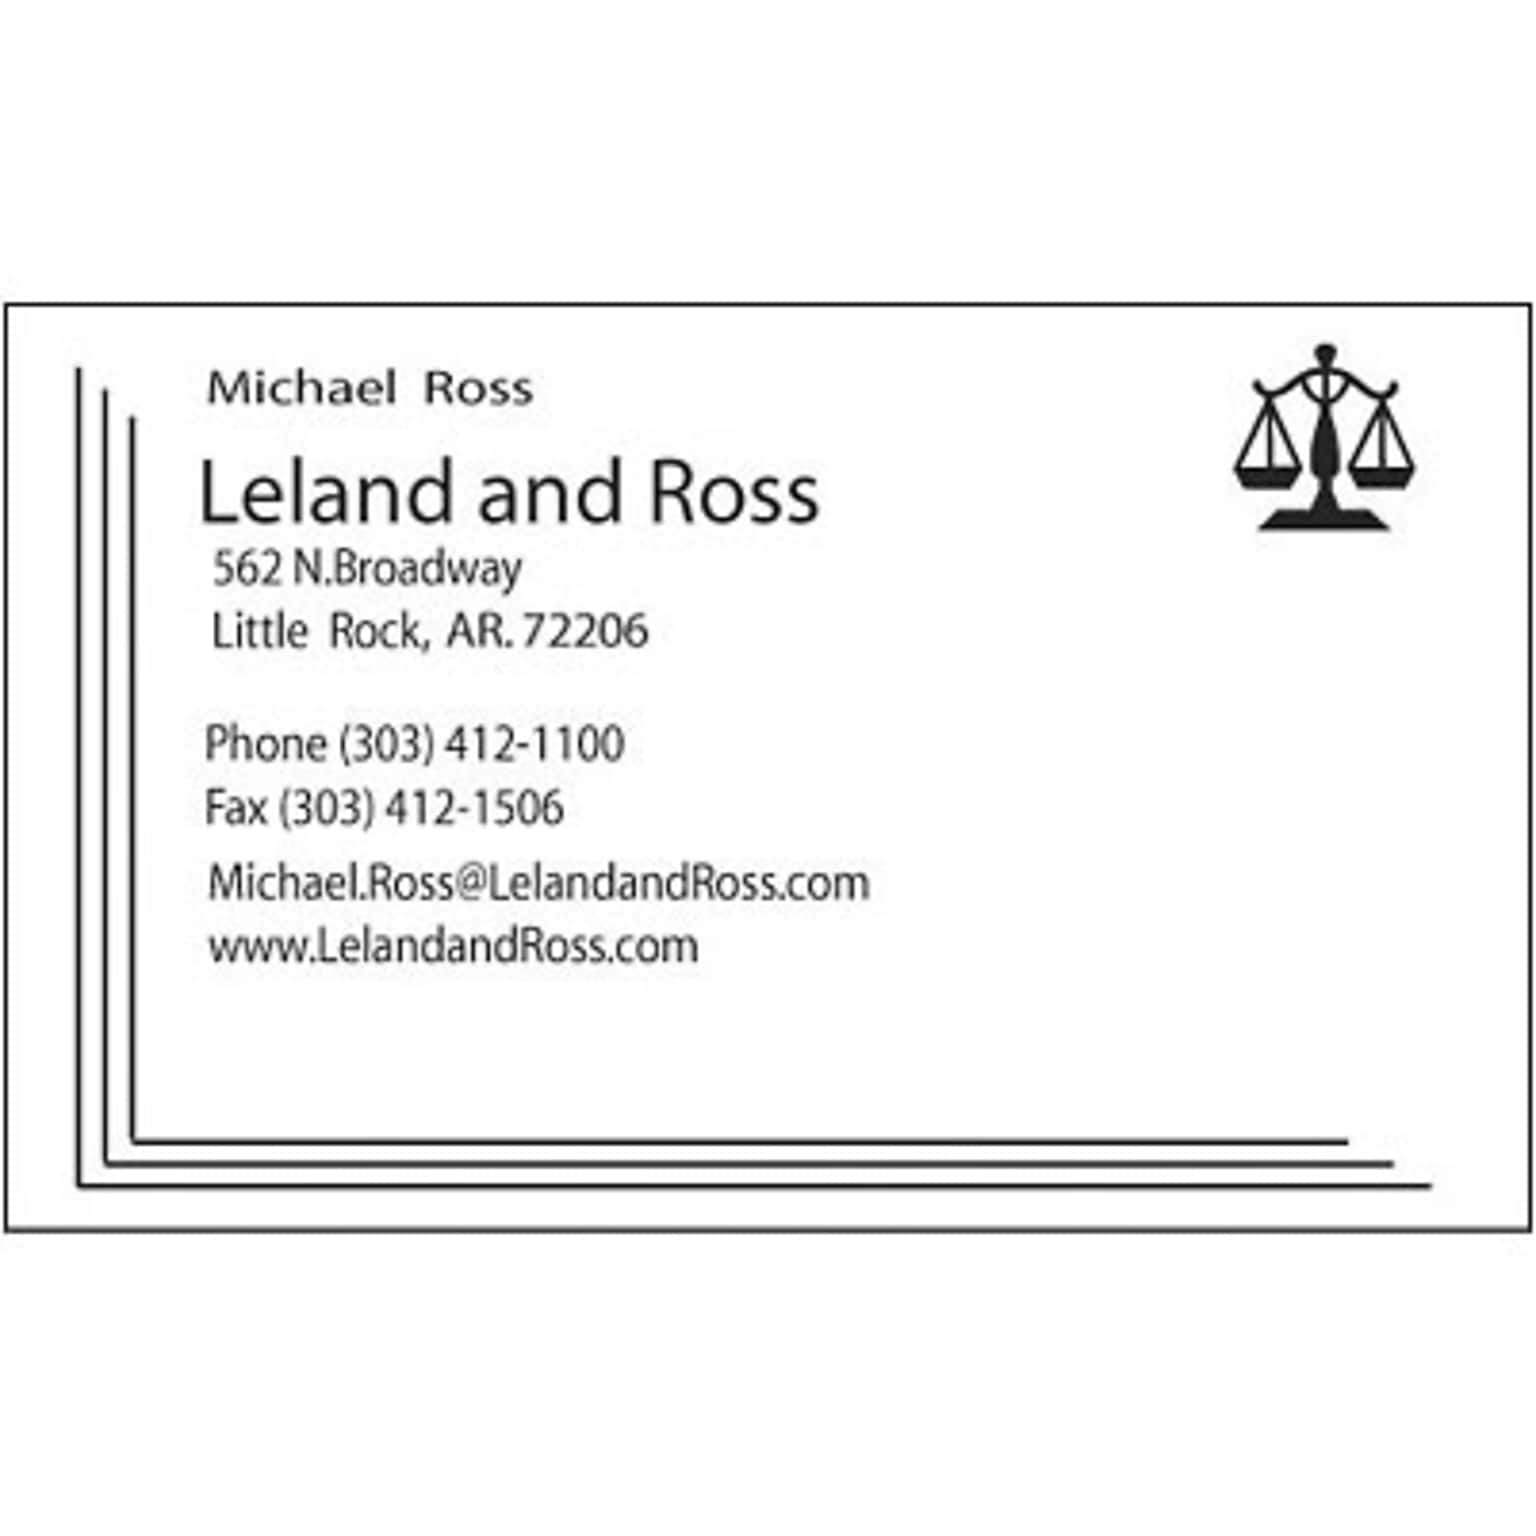 Custom 1-2 Color Business Cards, CLASSIC CREST® Natural White 80#, Raised Print, 1 Standard Ink, 2-Sided, 250/PK